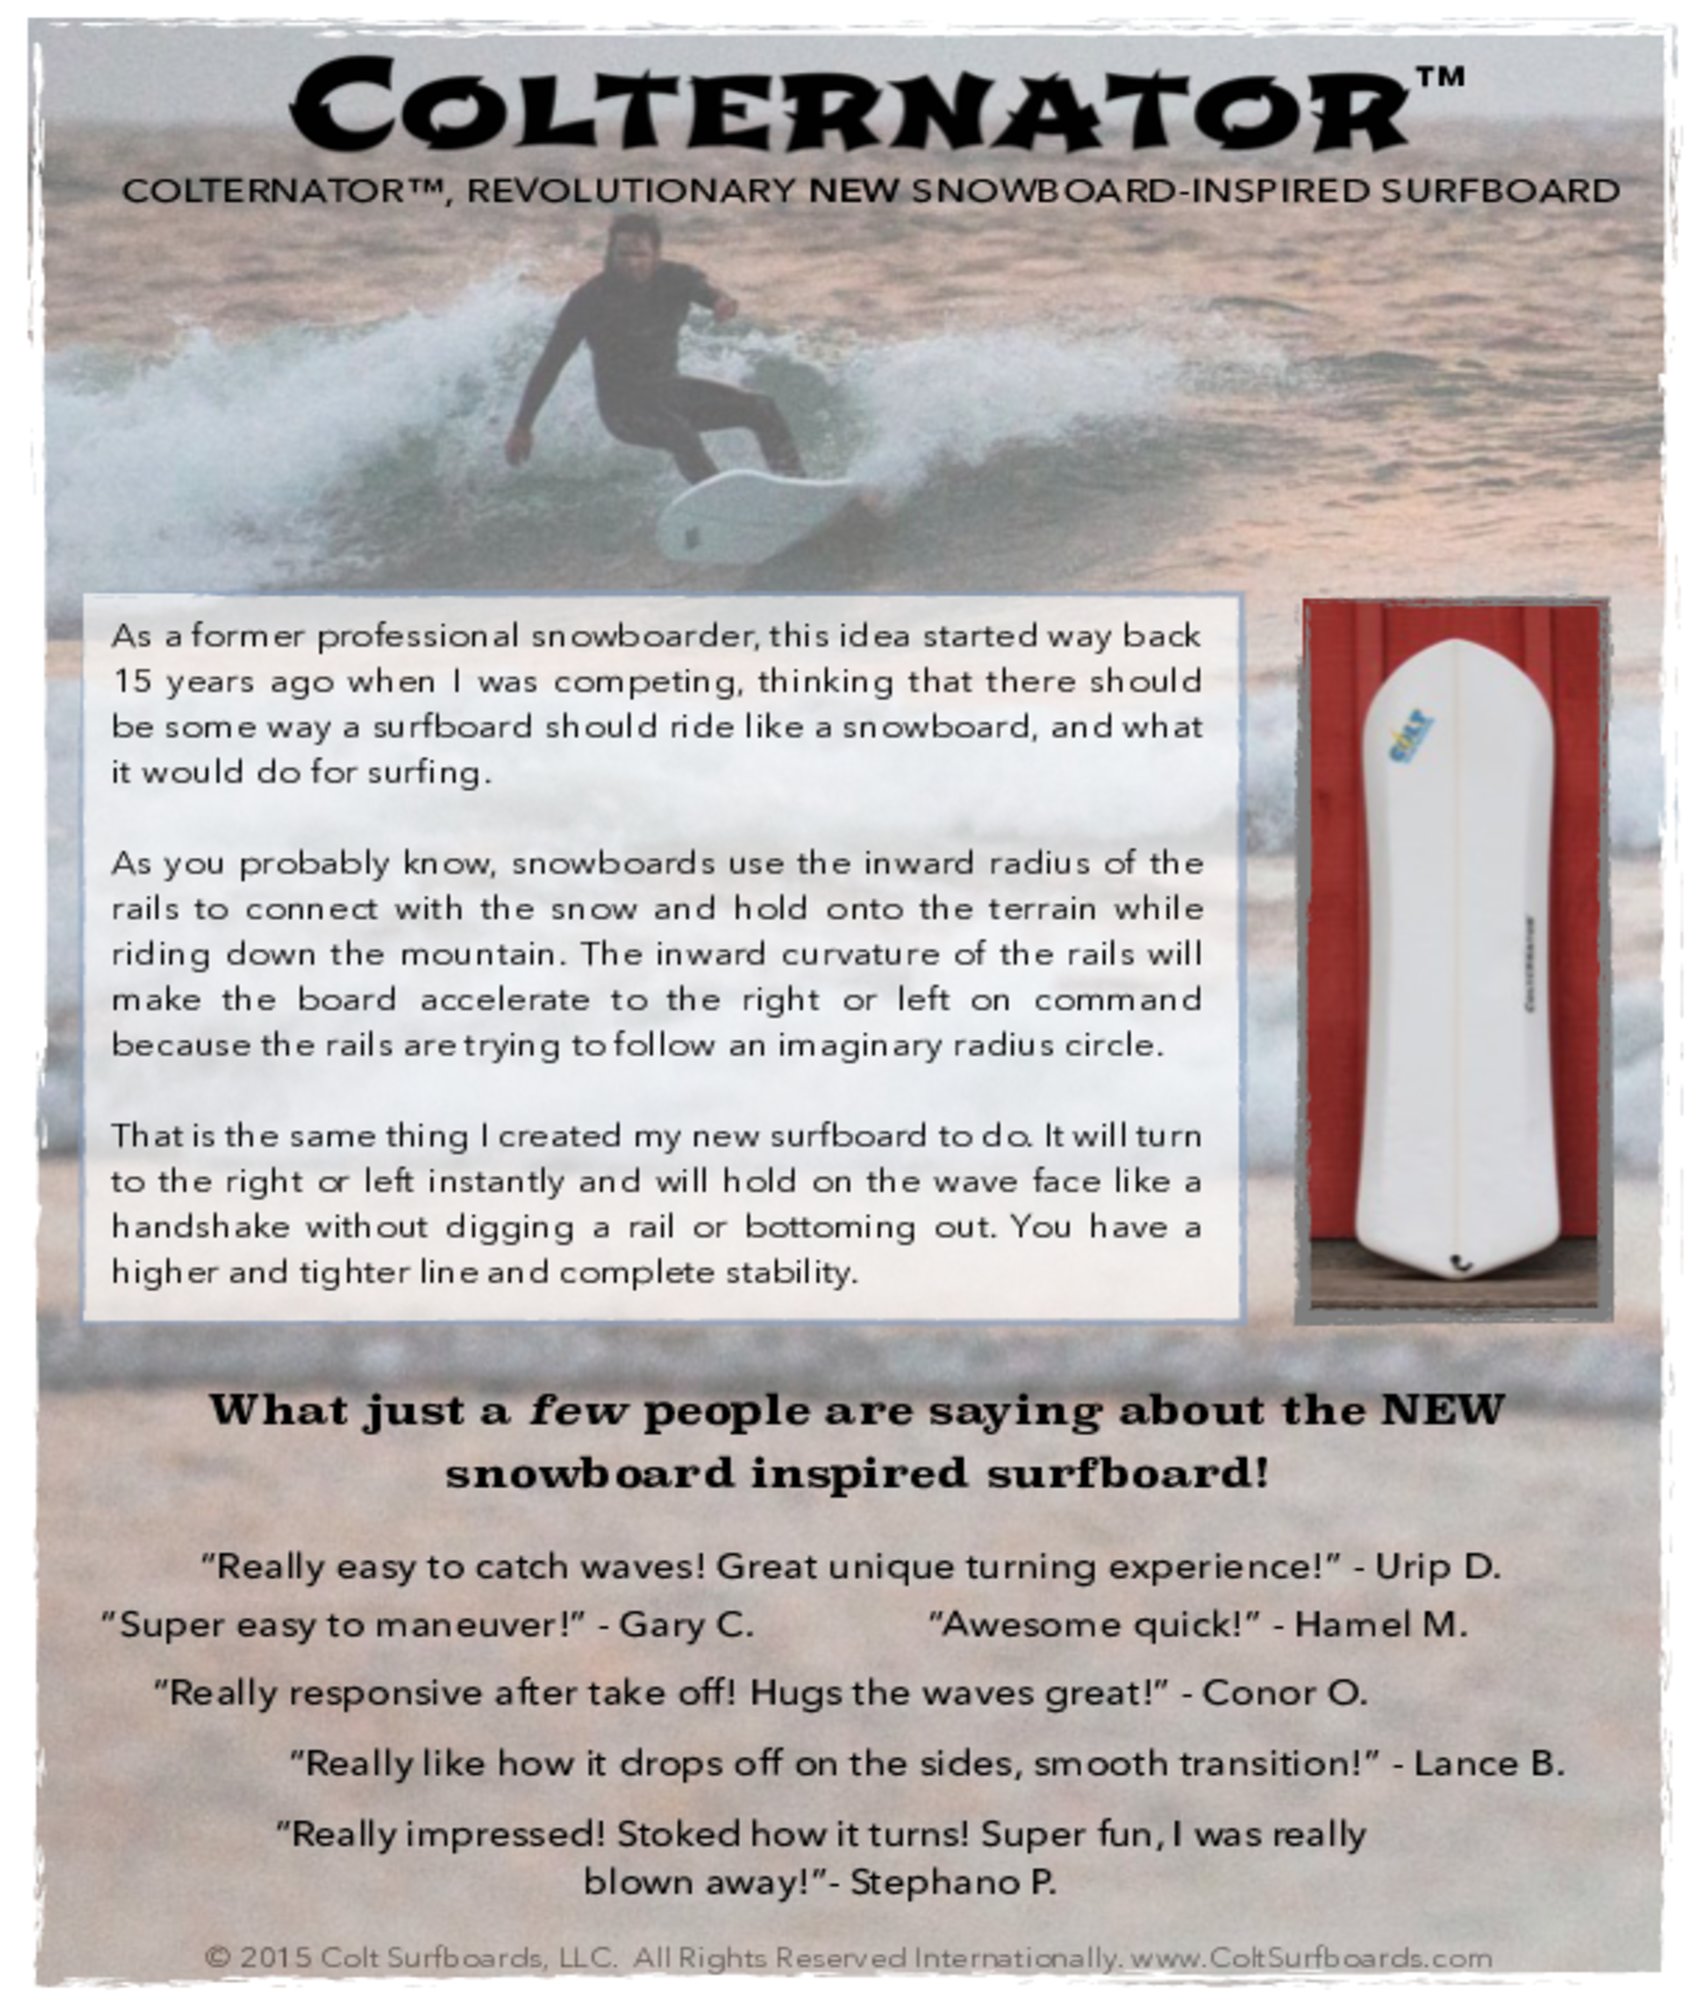 About_Colternator_Surfboards_surboards_tab_© 2015 Colt Surfboards LLC All rights reserved internationally